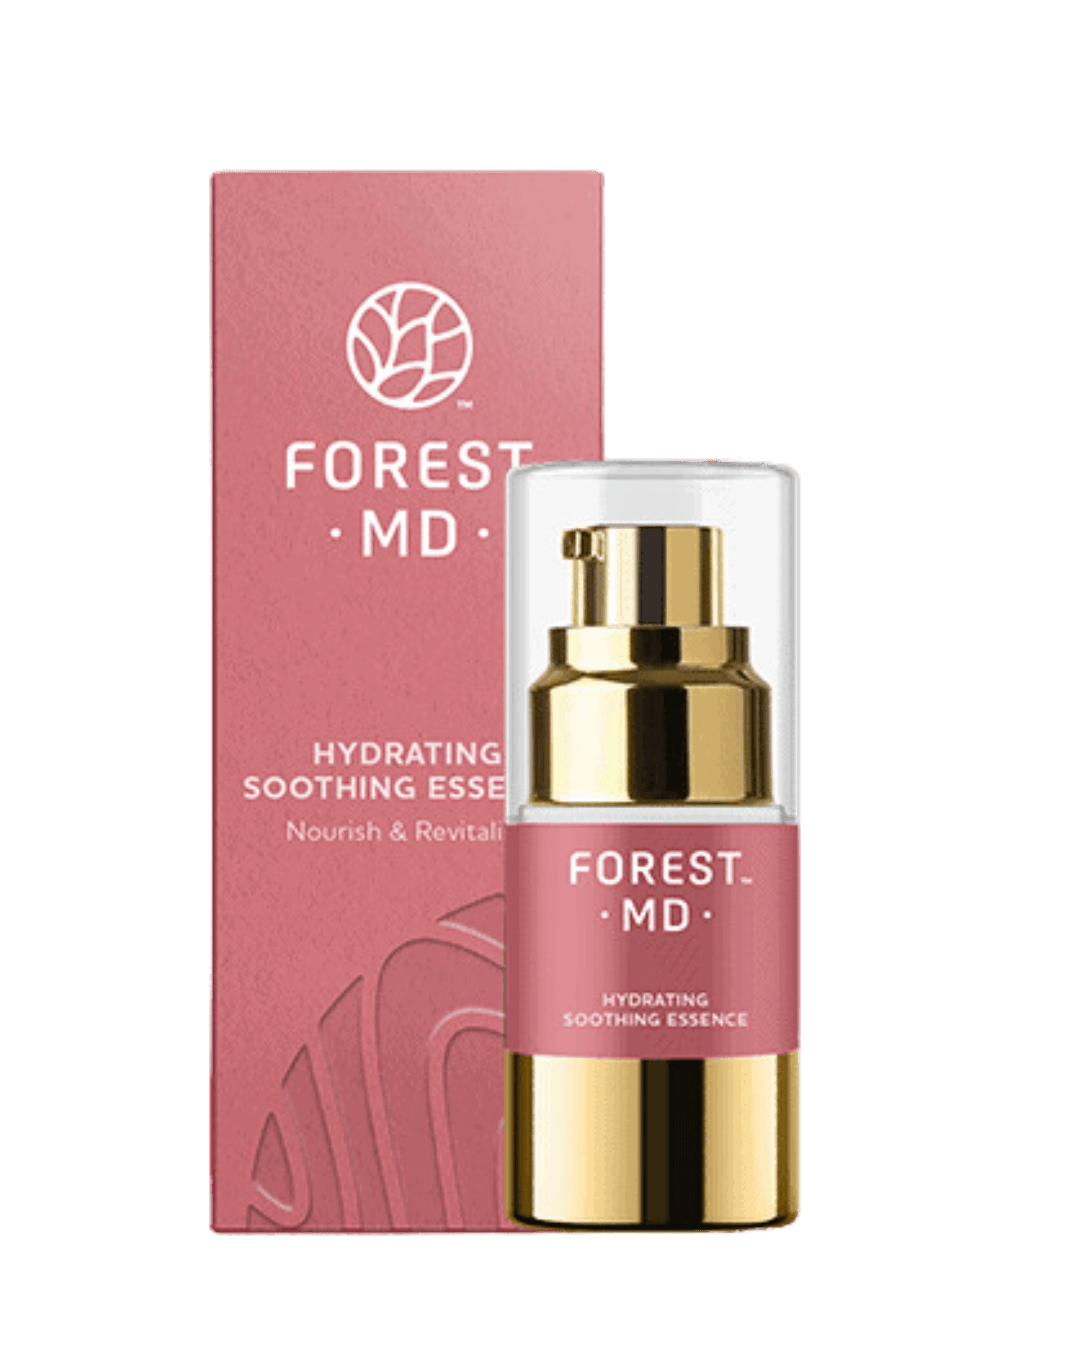 FOREST MD Hydrating Soothing Essence